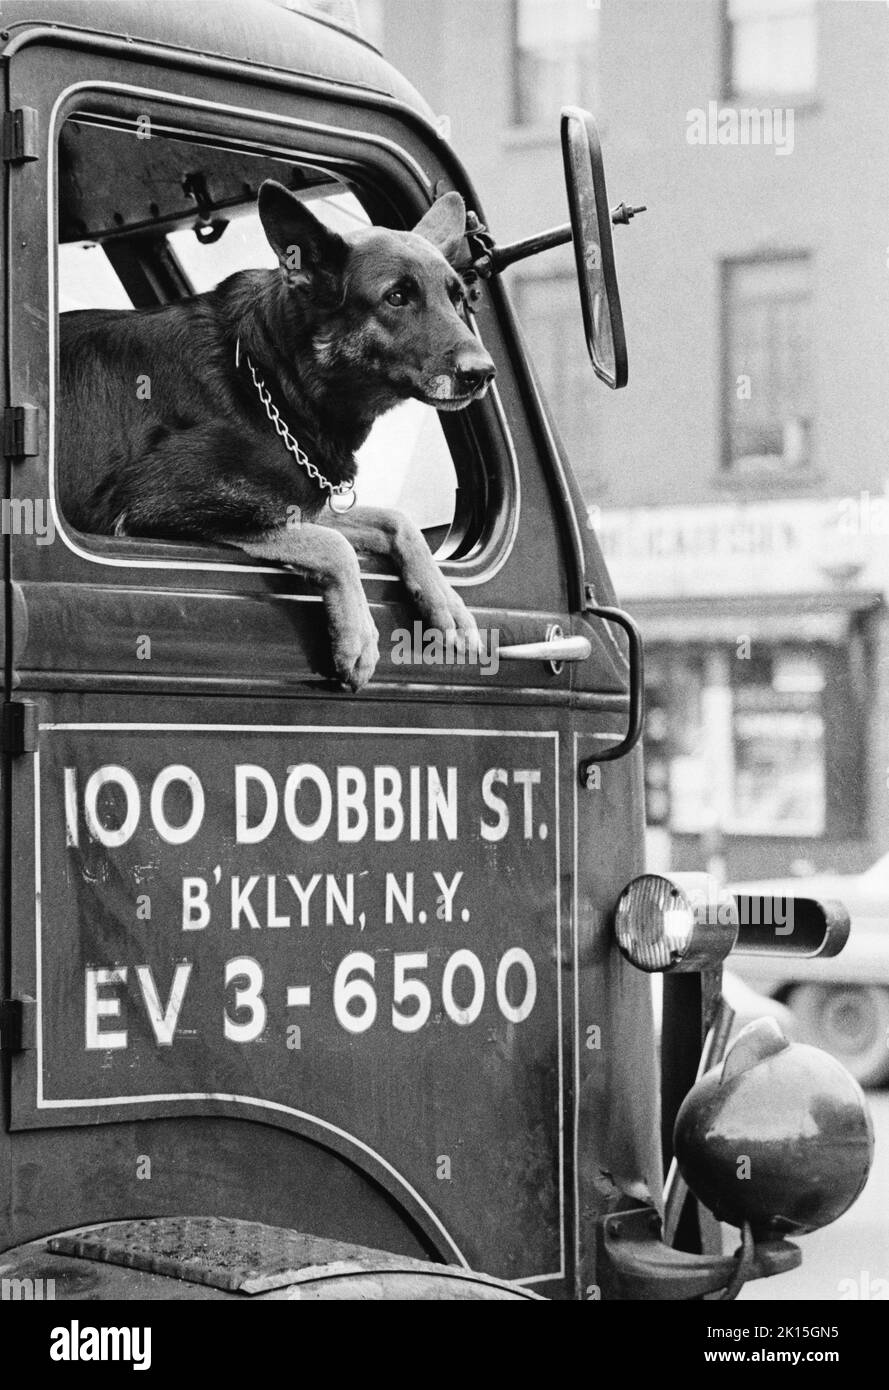 A dog looking out the window of an old truck in Brooklyn, New York. Stock Photo